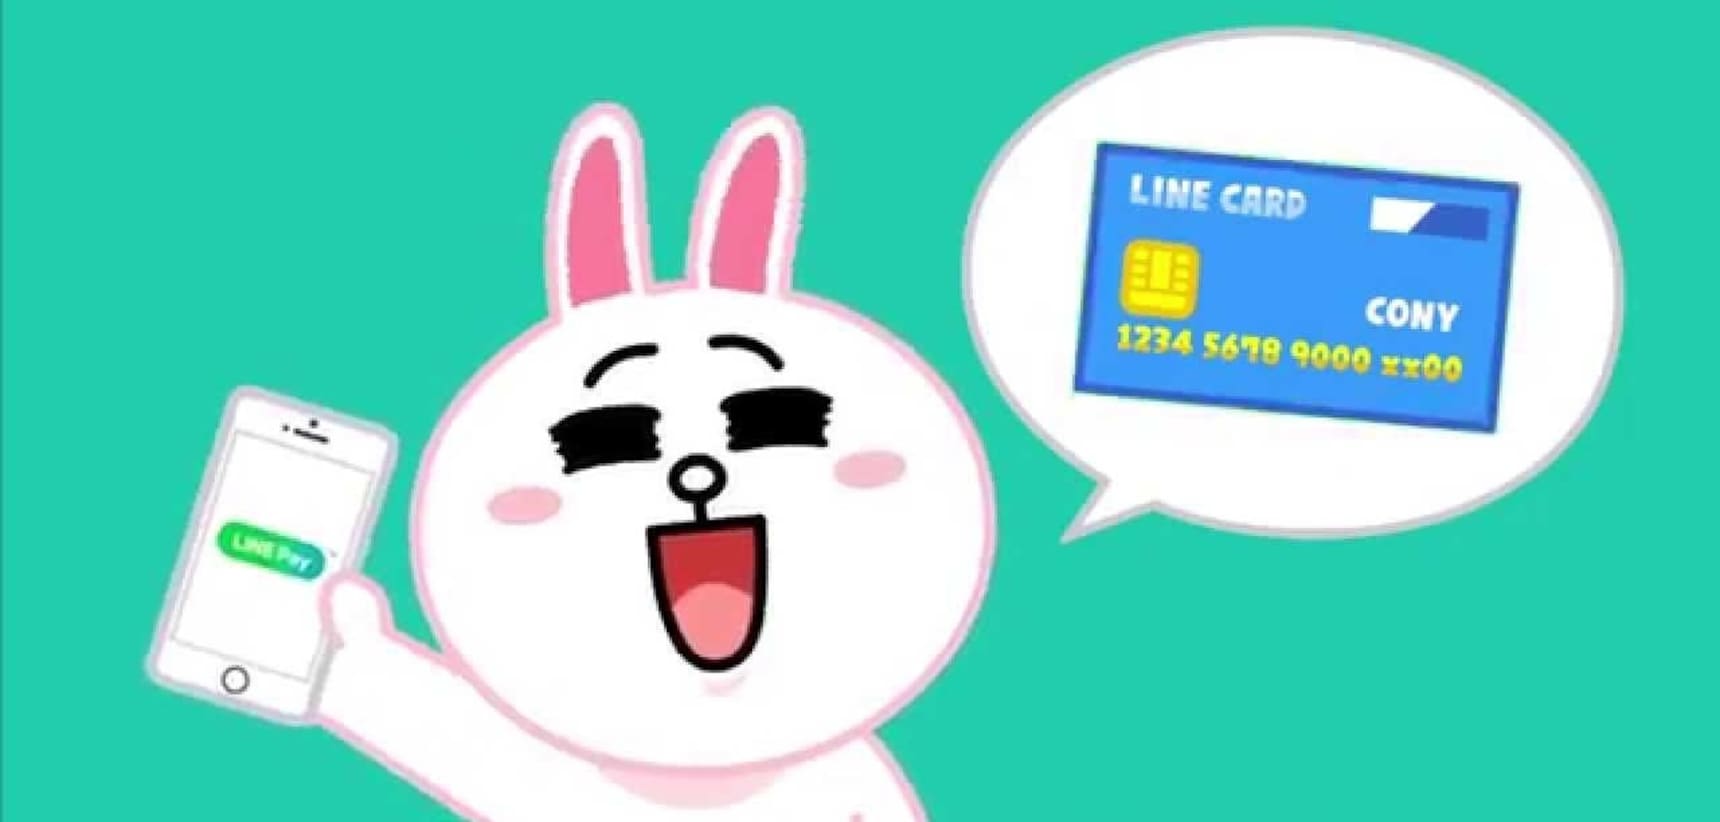 Why You Should Get a Line Pay Card Now